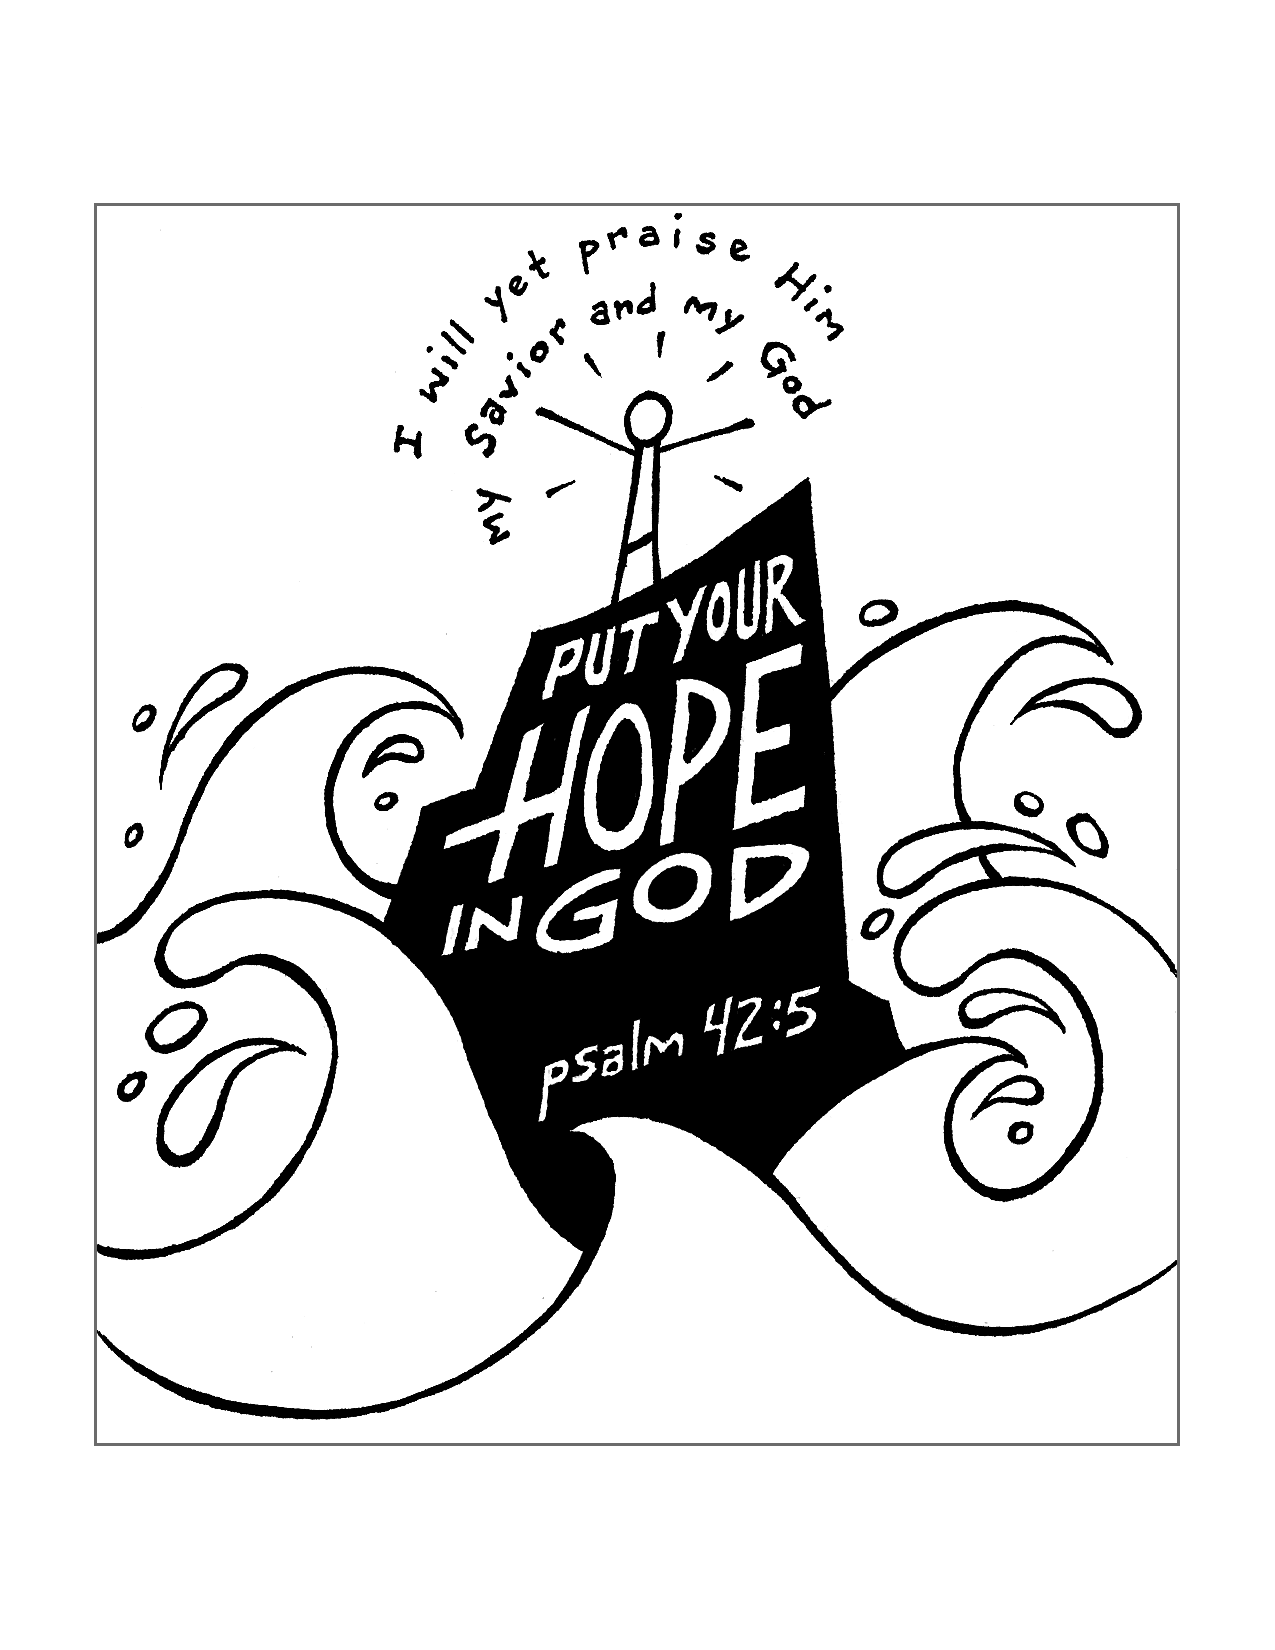 Psalm 42 5 Bible Coloring Page